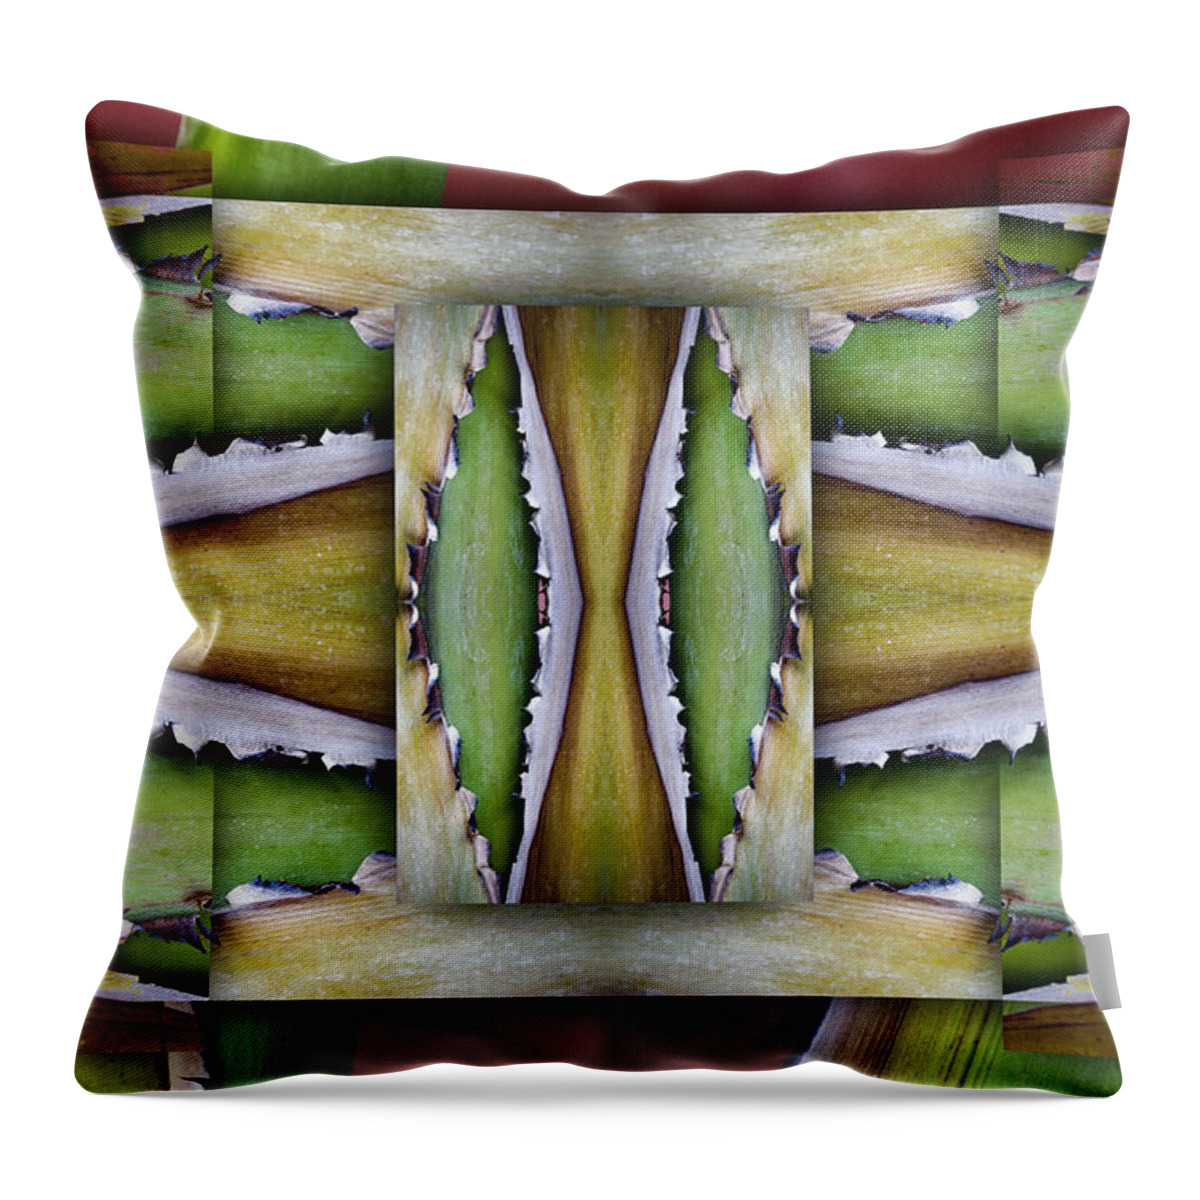 Tropical Throw Pillow featuring the photograph Tropical One by Carol Leigh